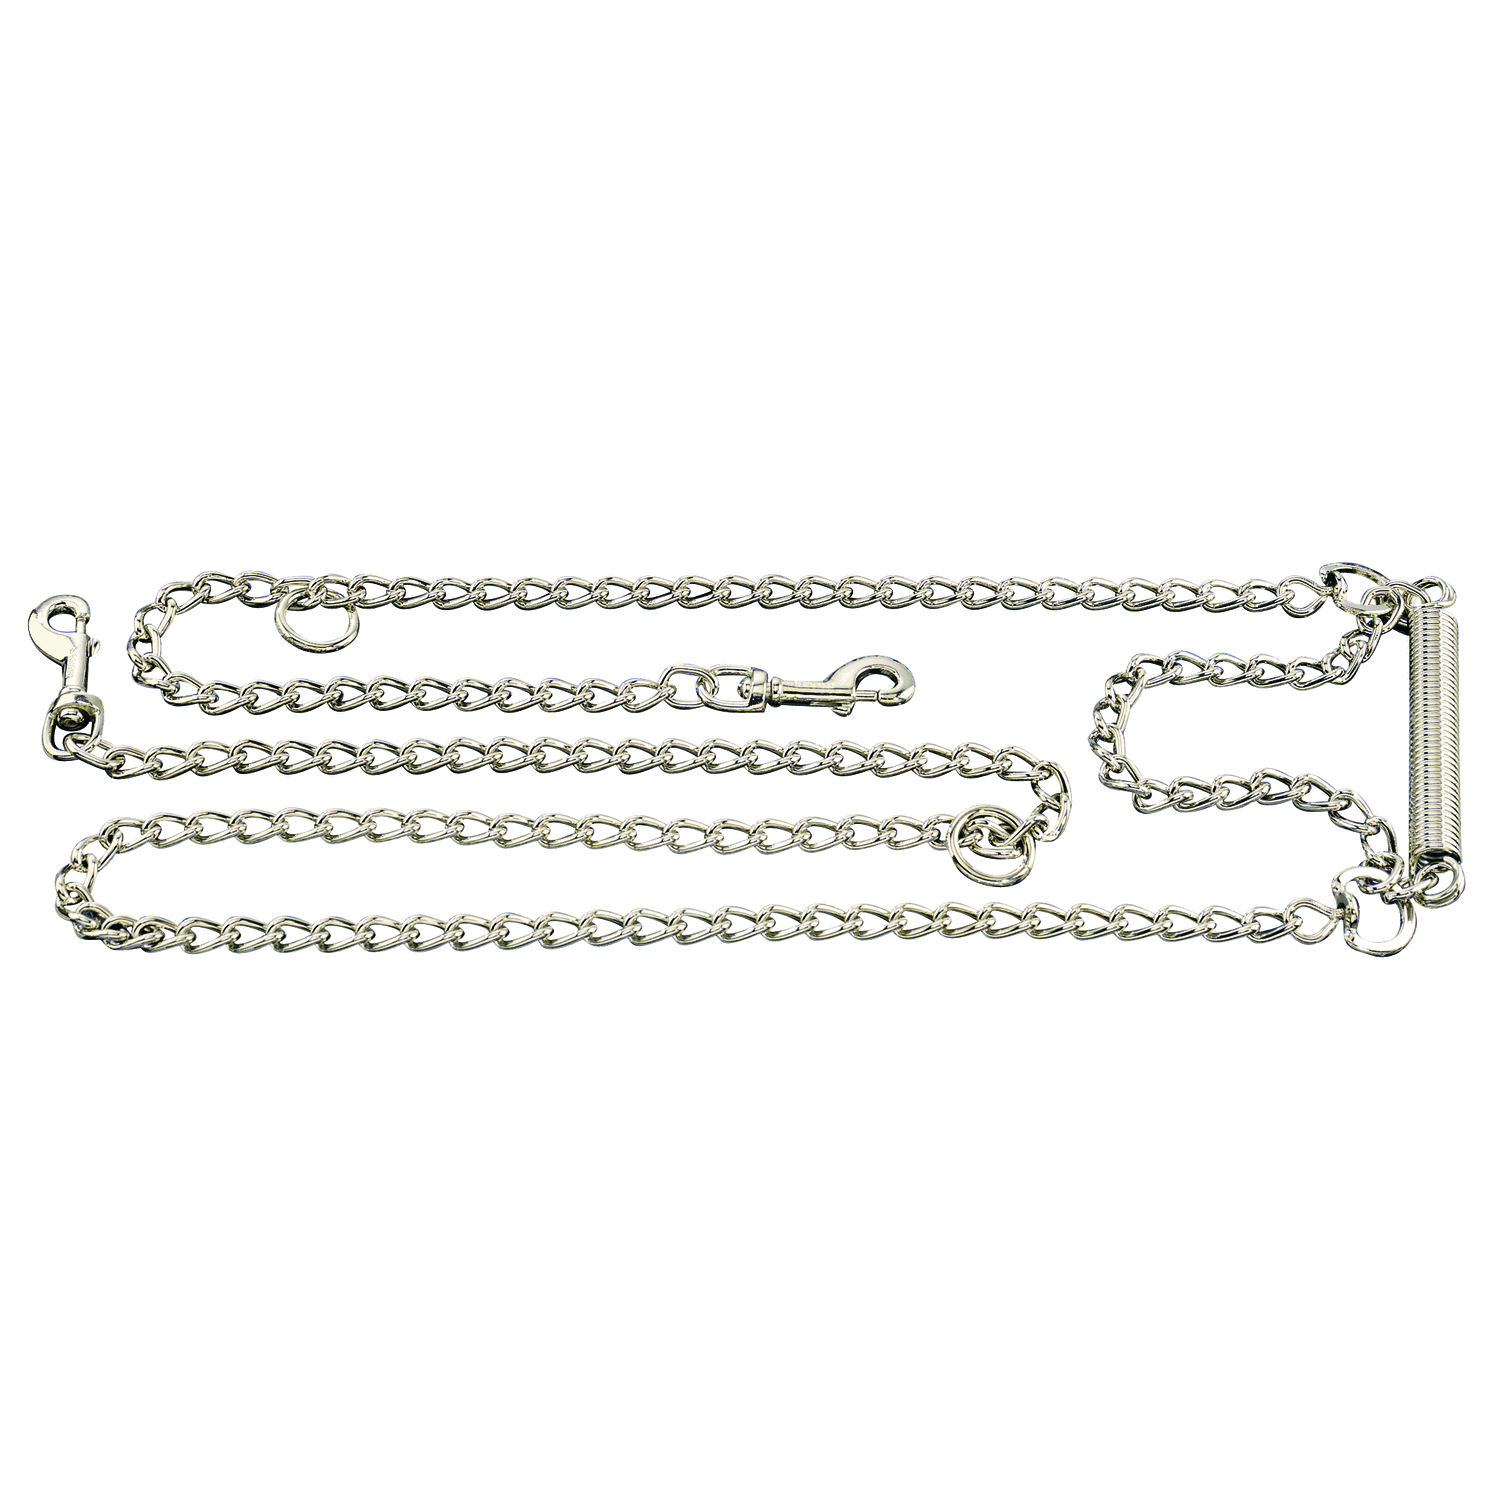 Tie-Out Training Chain (Steel Nickel-Plated) - 4mm